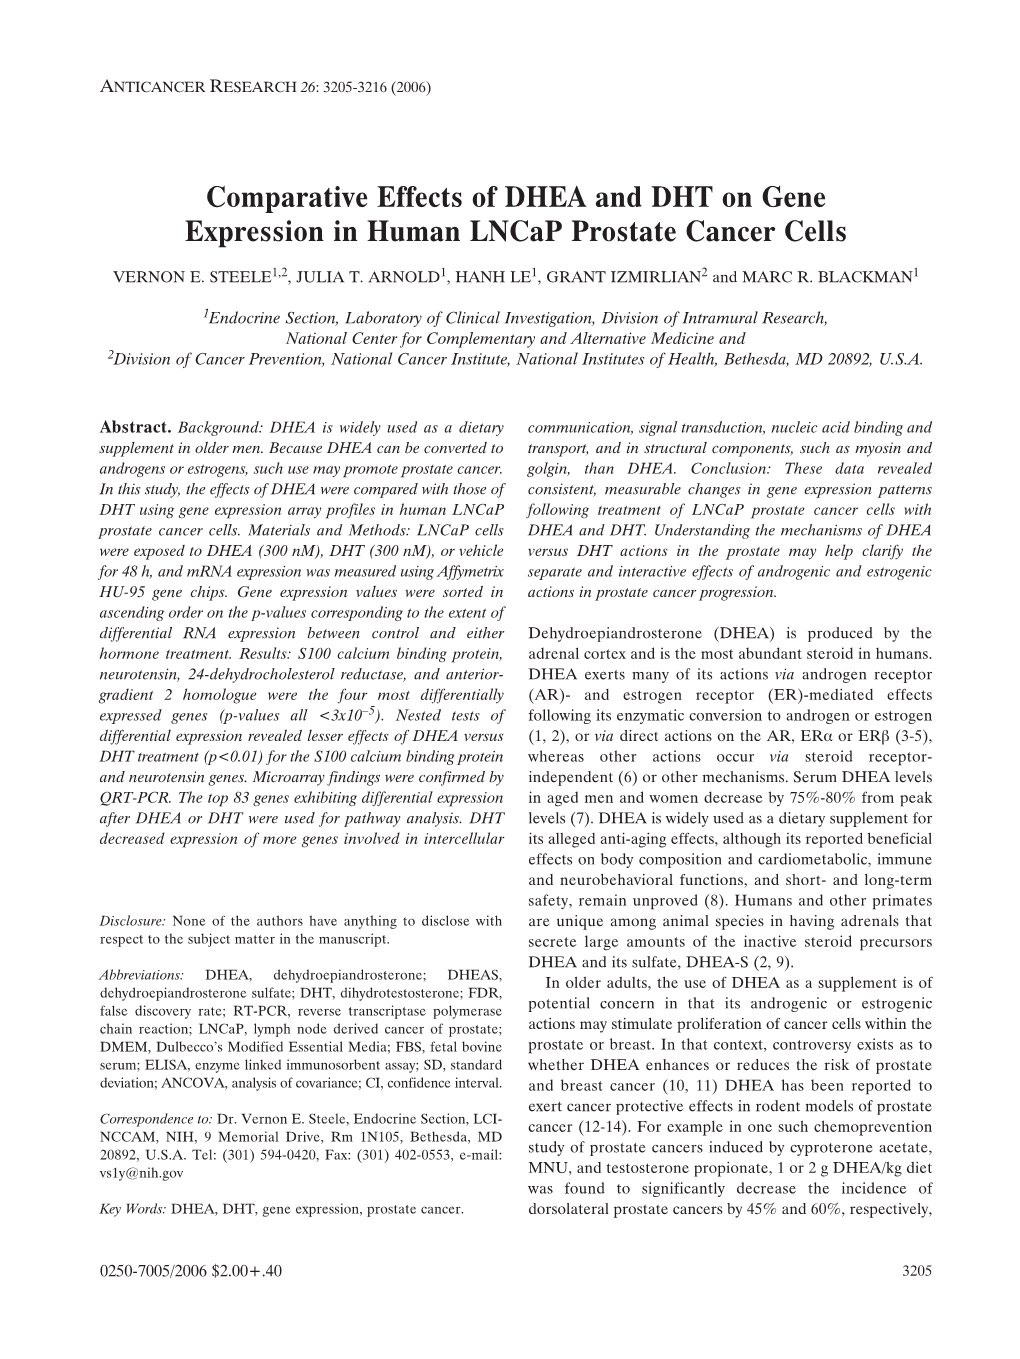 Comparative Effects of DHEA and DHT on Gene Expression in Human Lncap Prostate Cancer Cells